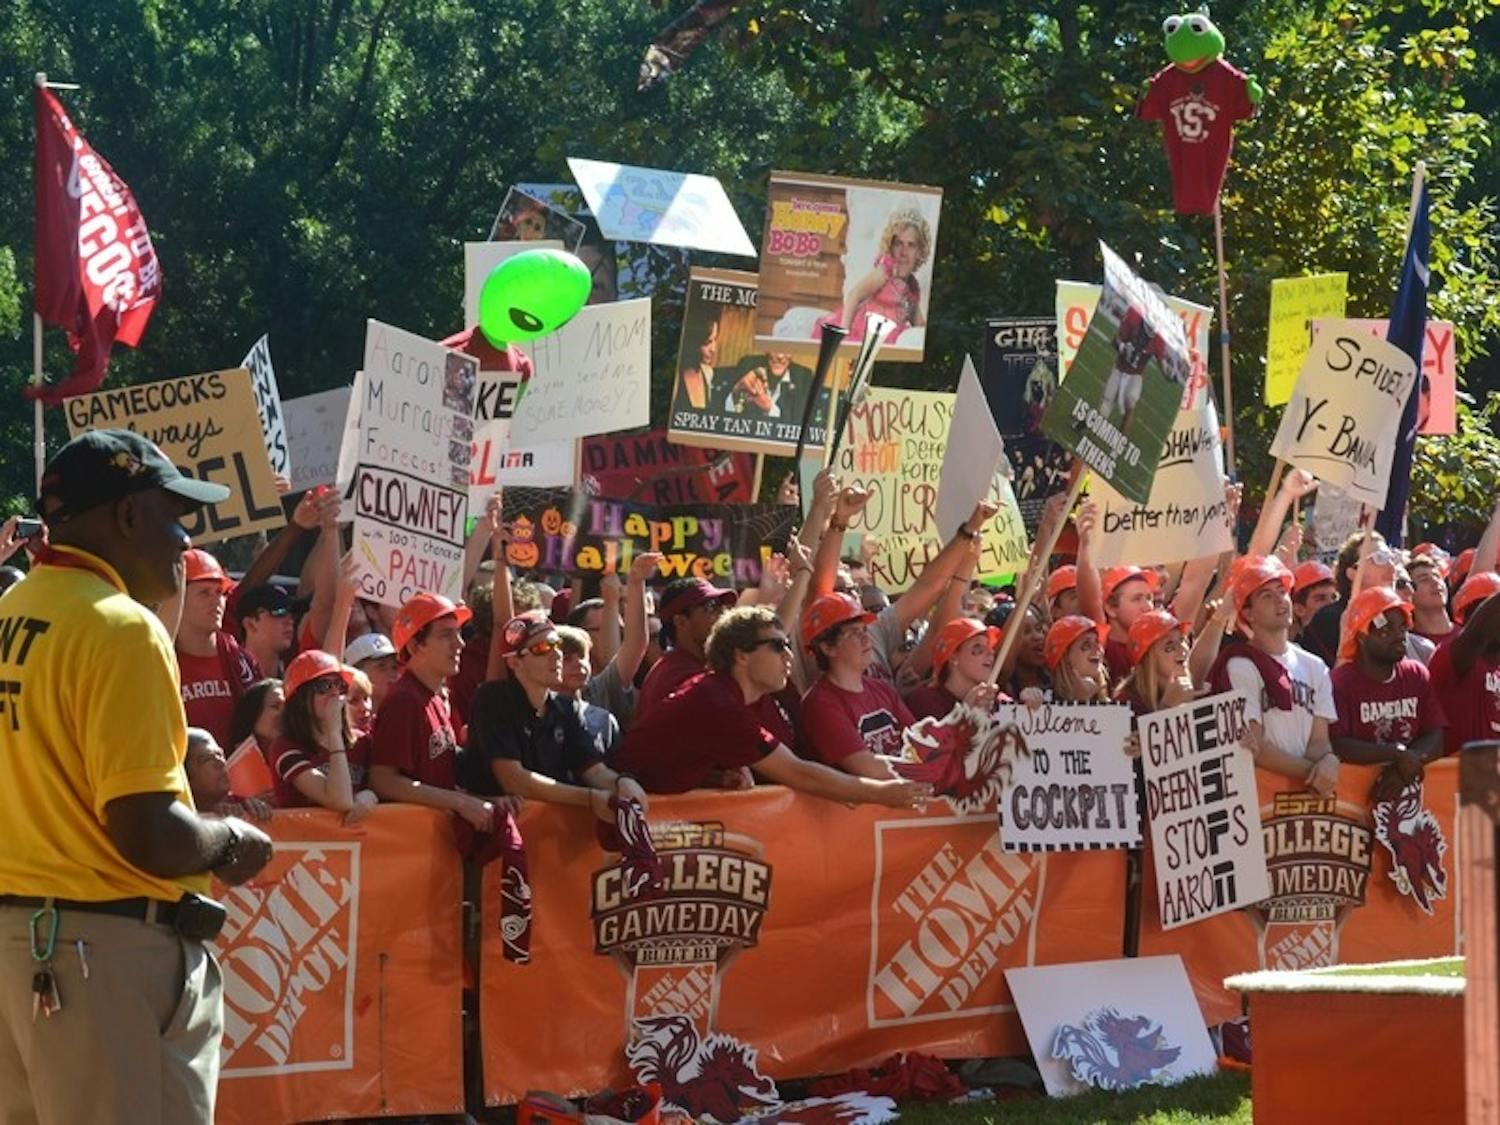 Fans arrived early and cheered often Friday night and Saturday morning as ESPN’s College GameDay broadcast live from the Horseshoe before the Gamecocks’ victory over Georgia.